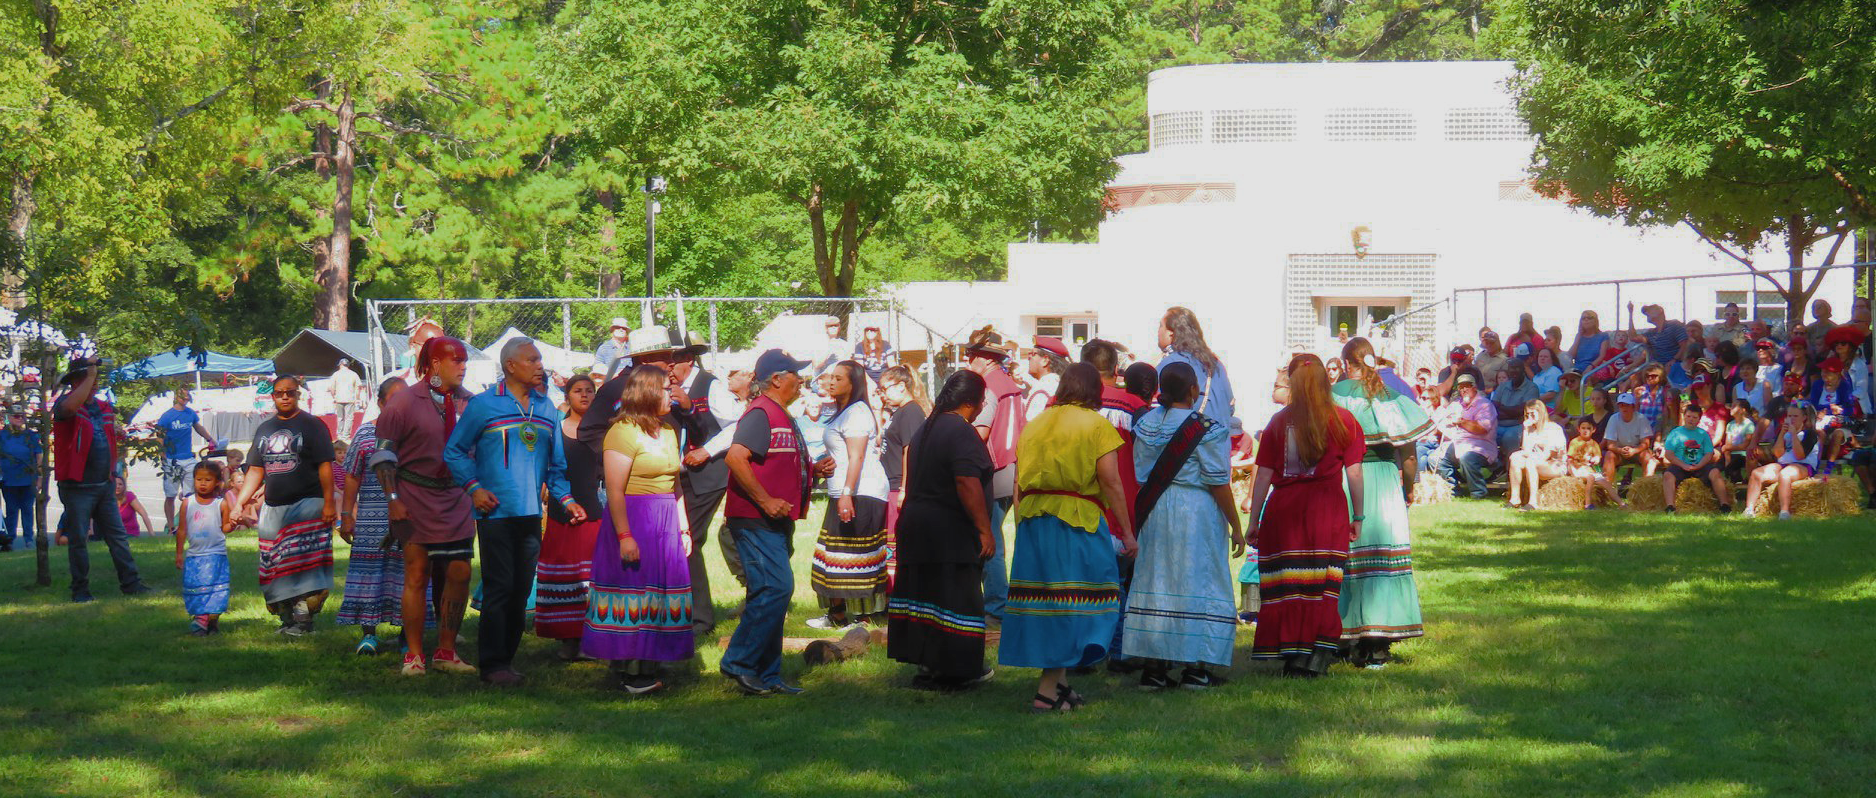 A group of Indigenous people performing a stomp dance in front an audience. The visitor center is in the background